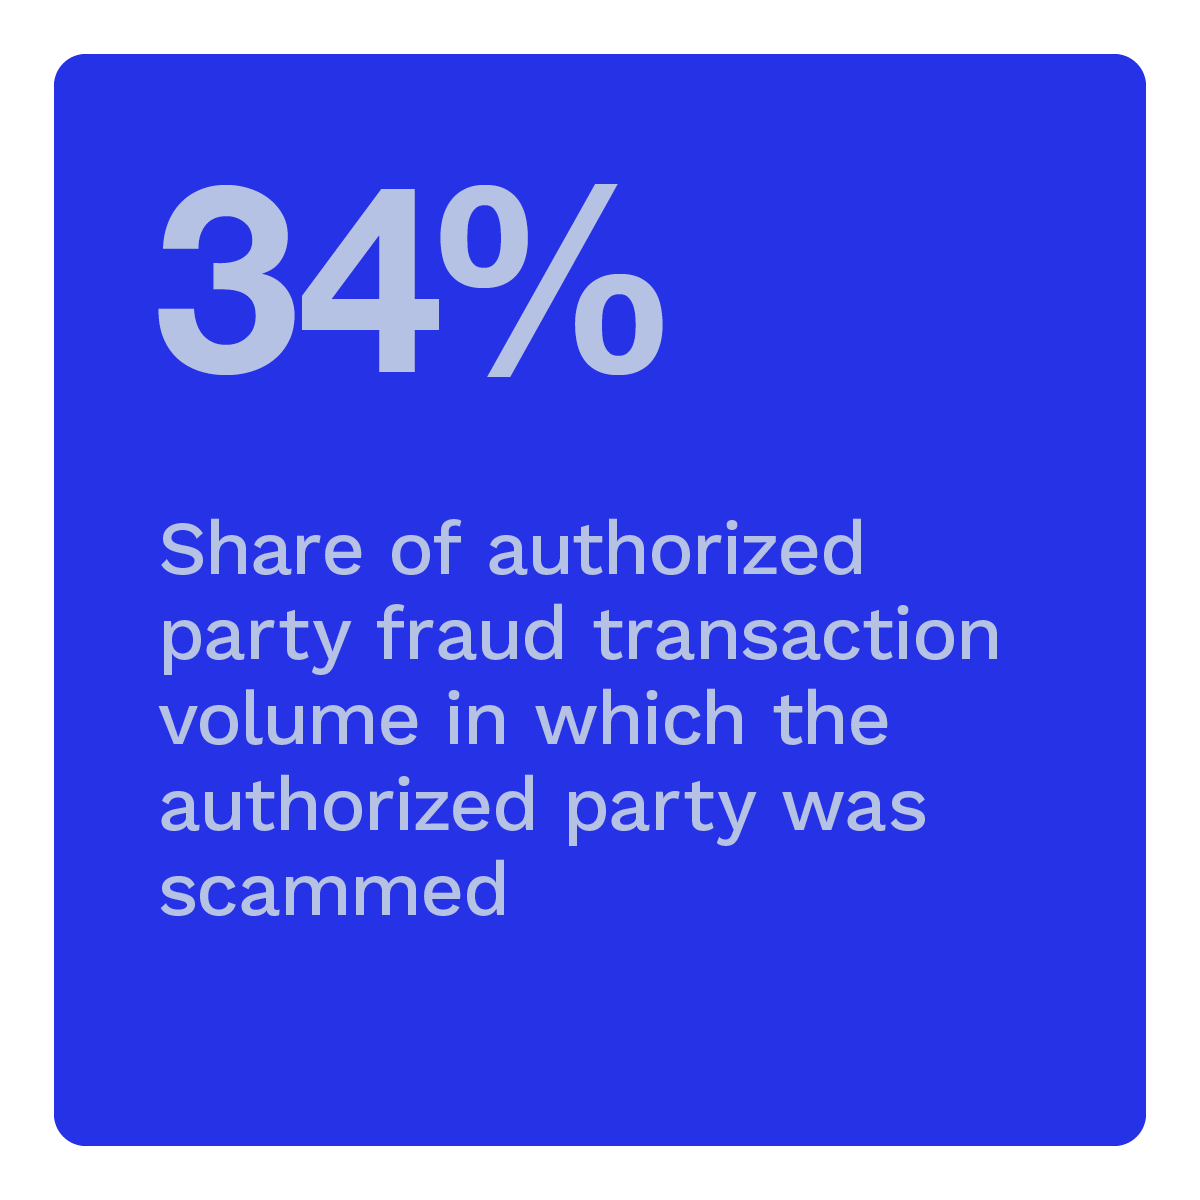 34%: Share of authorized party fraud transaction volume in which the authorized party was scammed